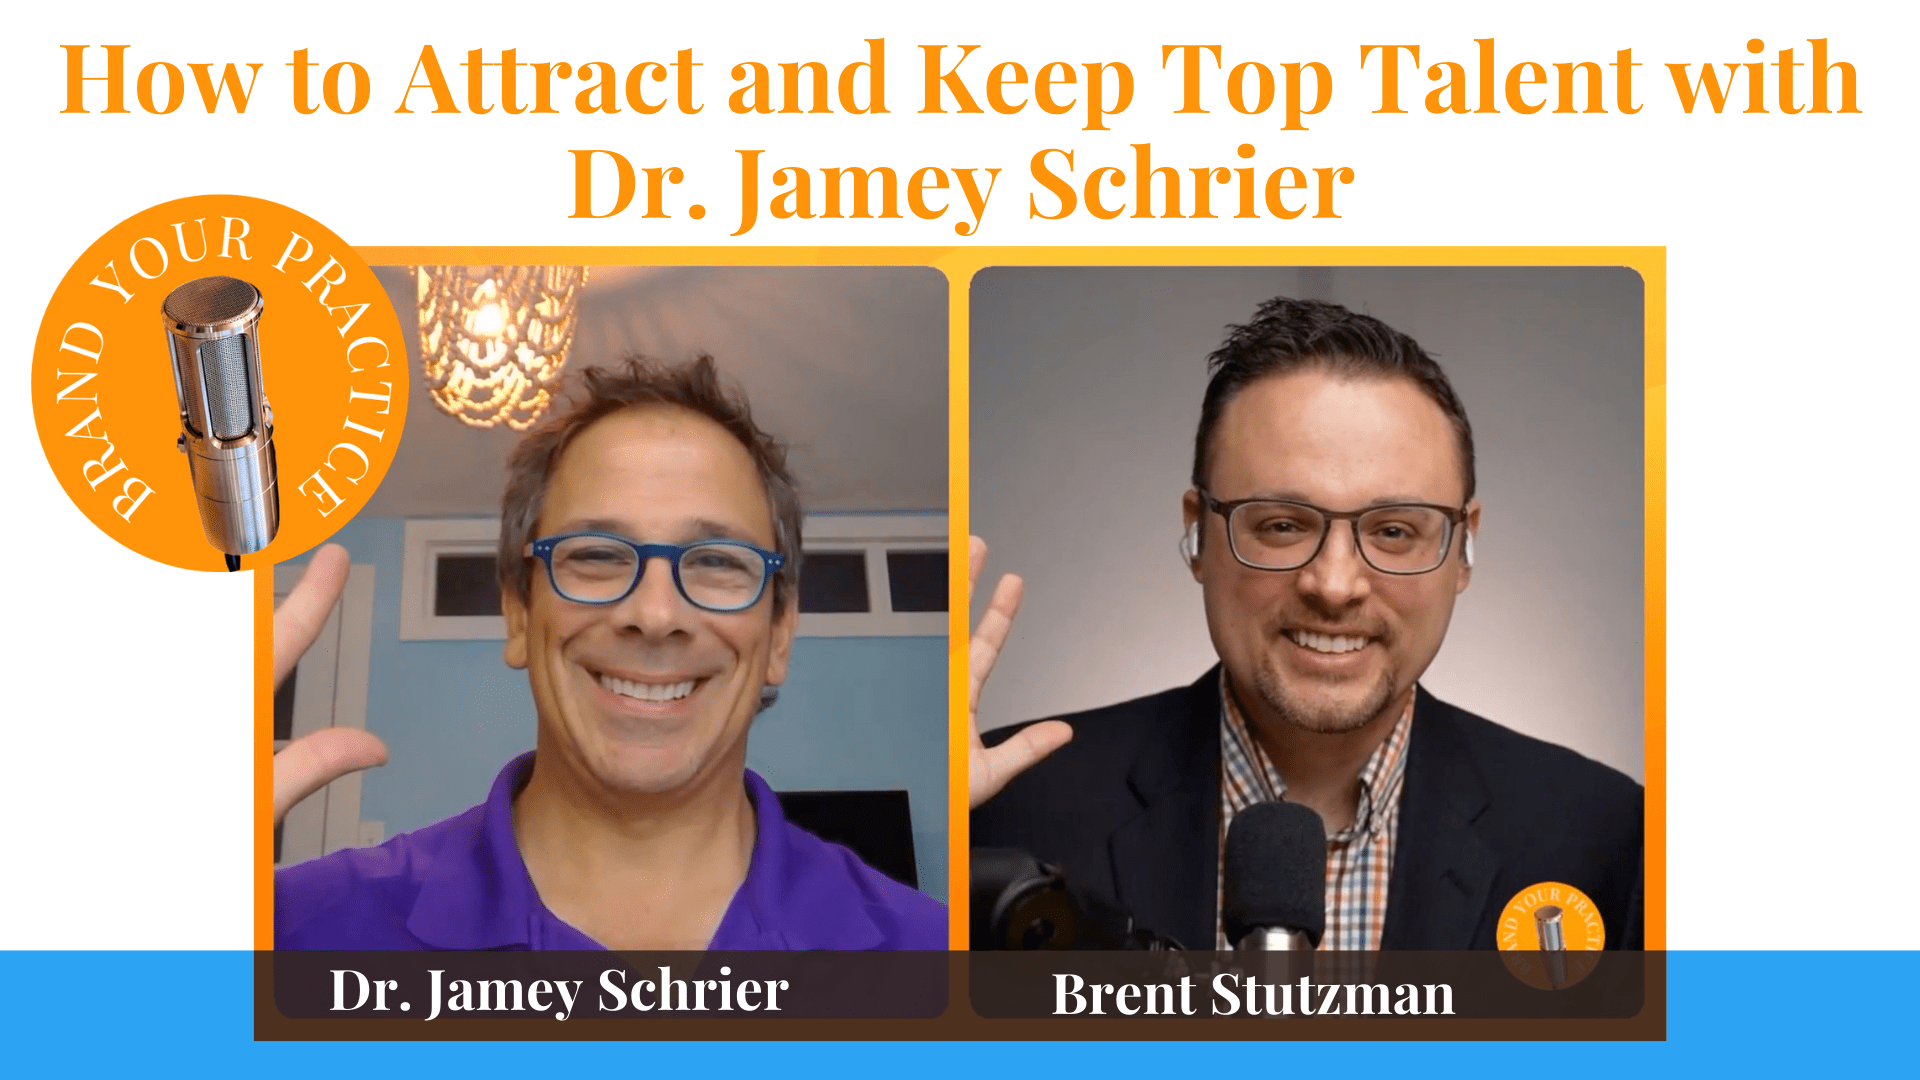 How to Attract and Keep Top Talent Without Paying Them TOP Dollar